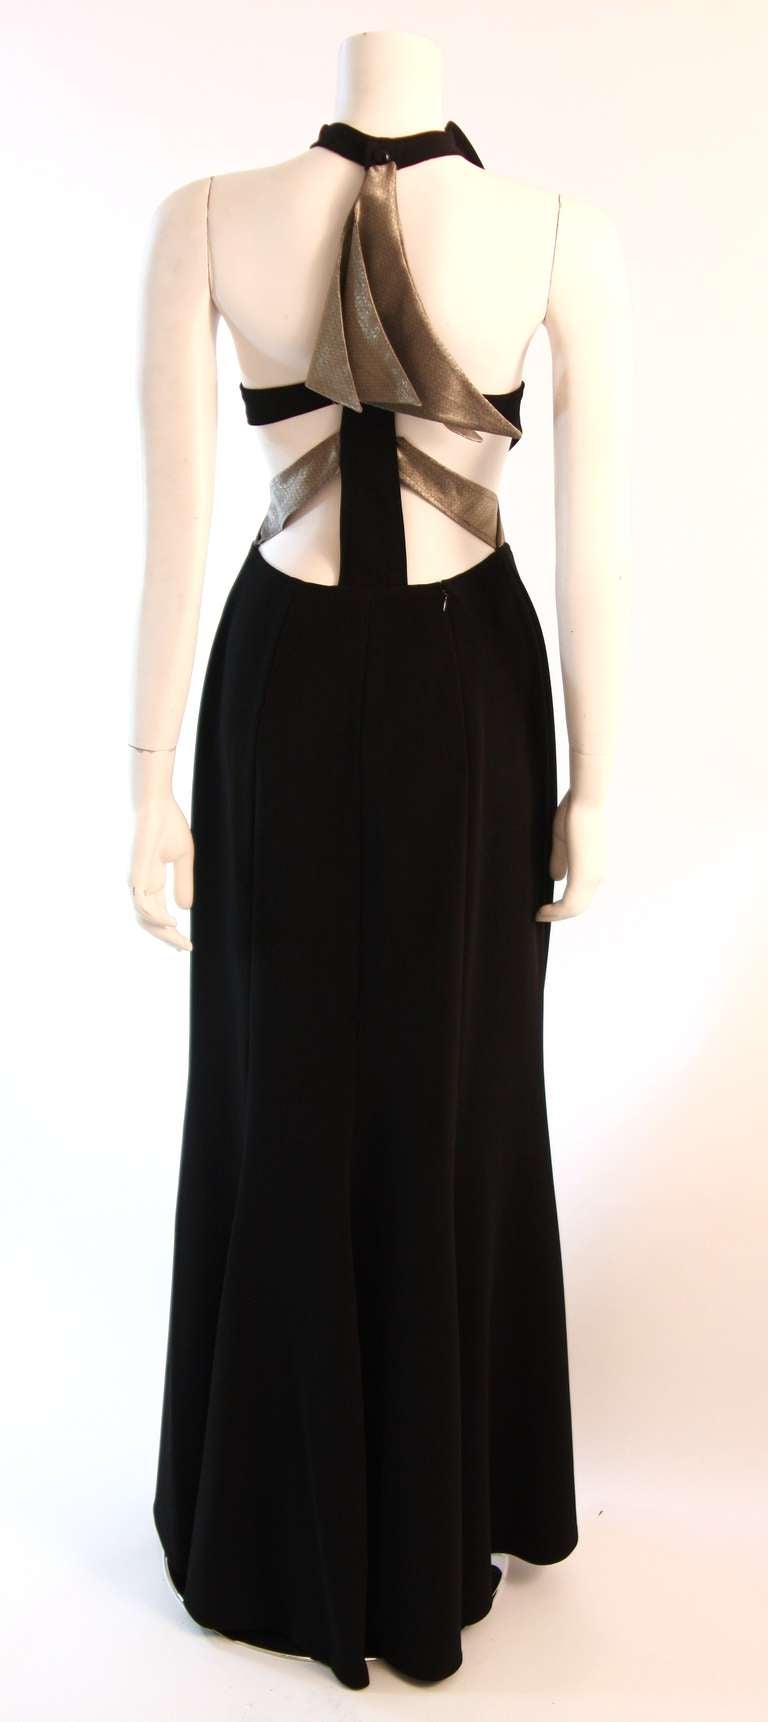 Kathryn Dianos Black Peek A Boo Gown with Metallic Accents Size 8 4